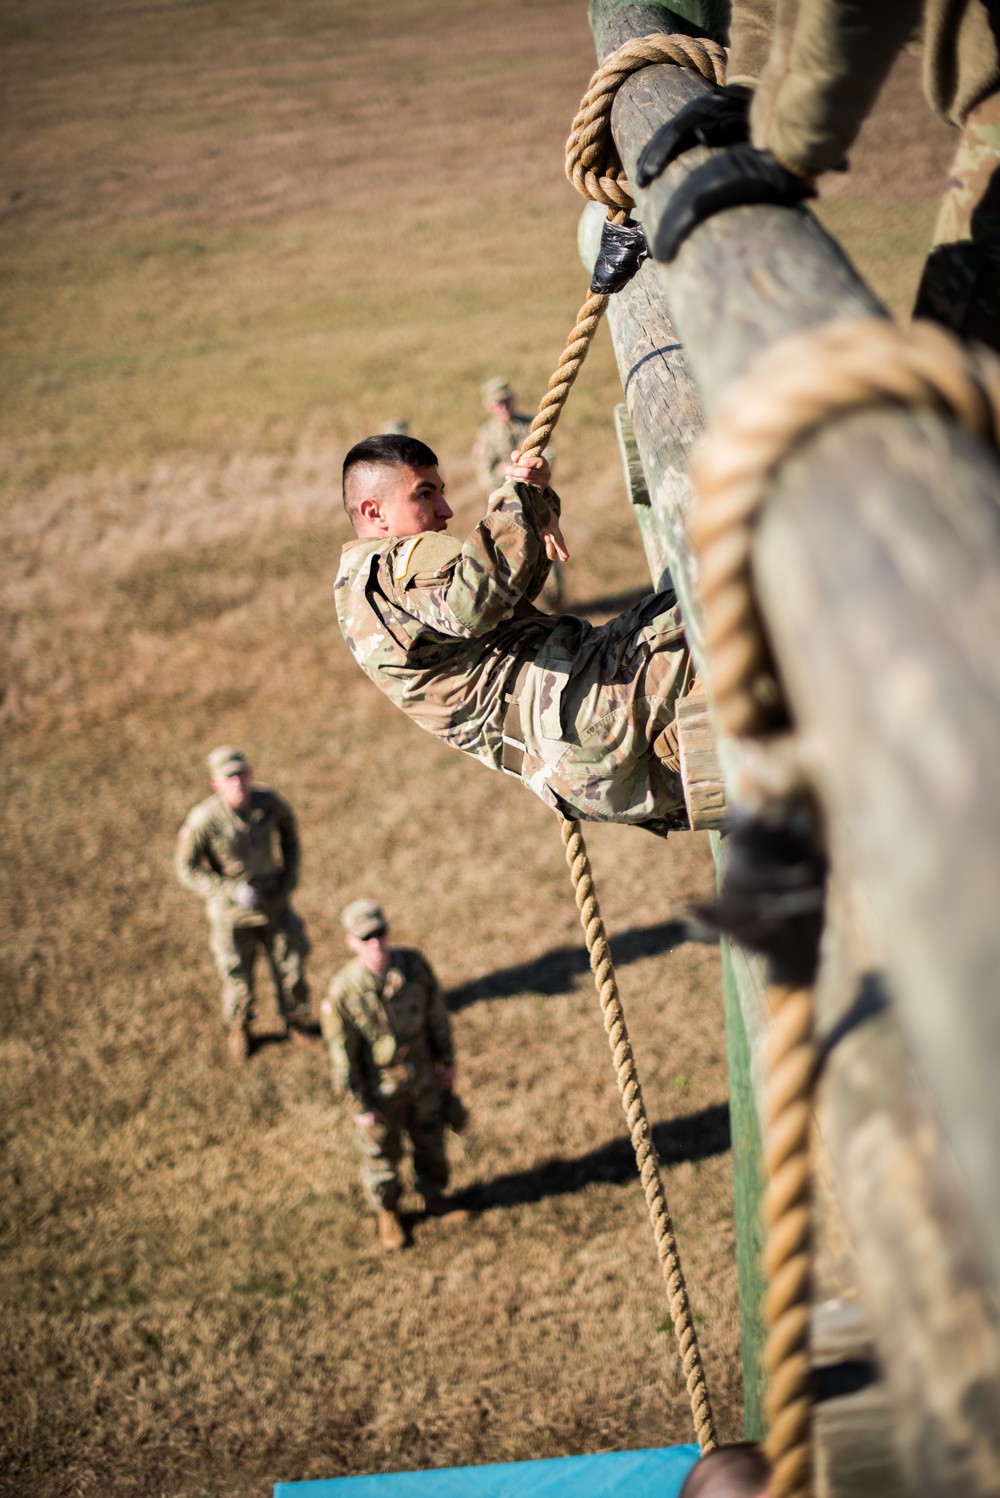 Oklahoma Guardsmen Compete to be the Best Warrior